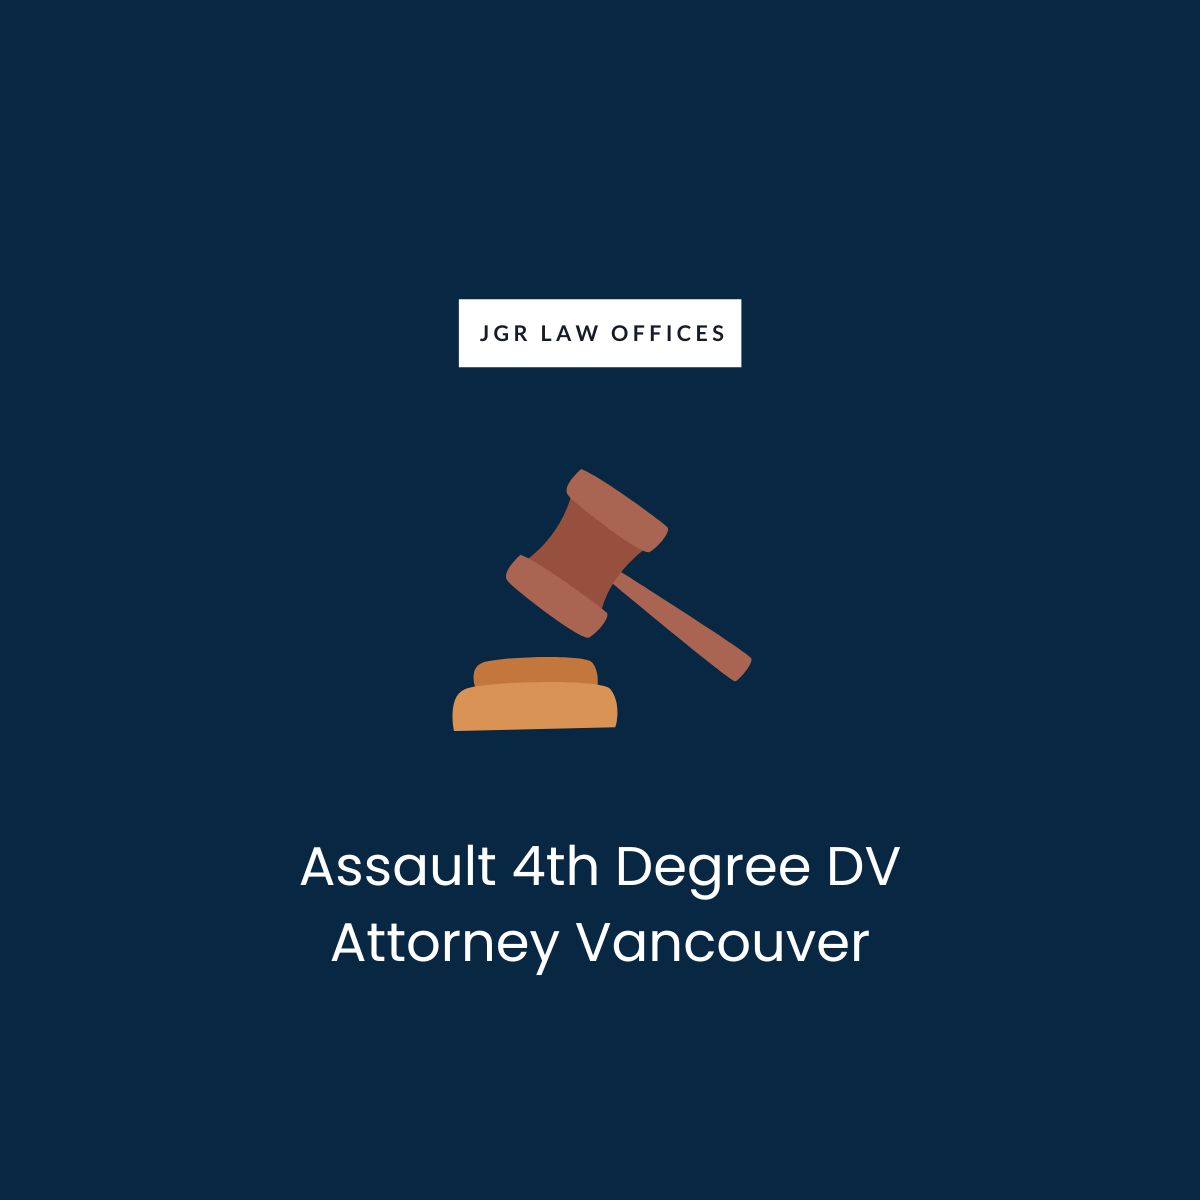 Assault 4th Degree DV Attorney Vancouver